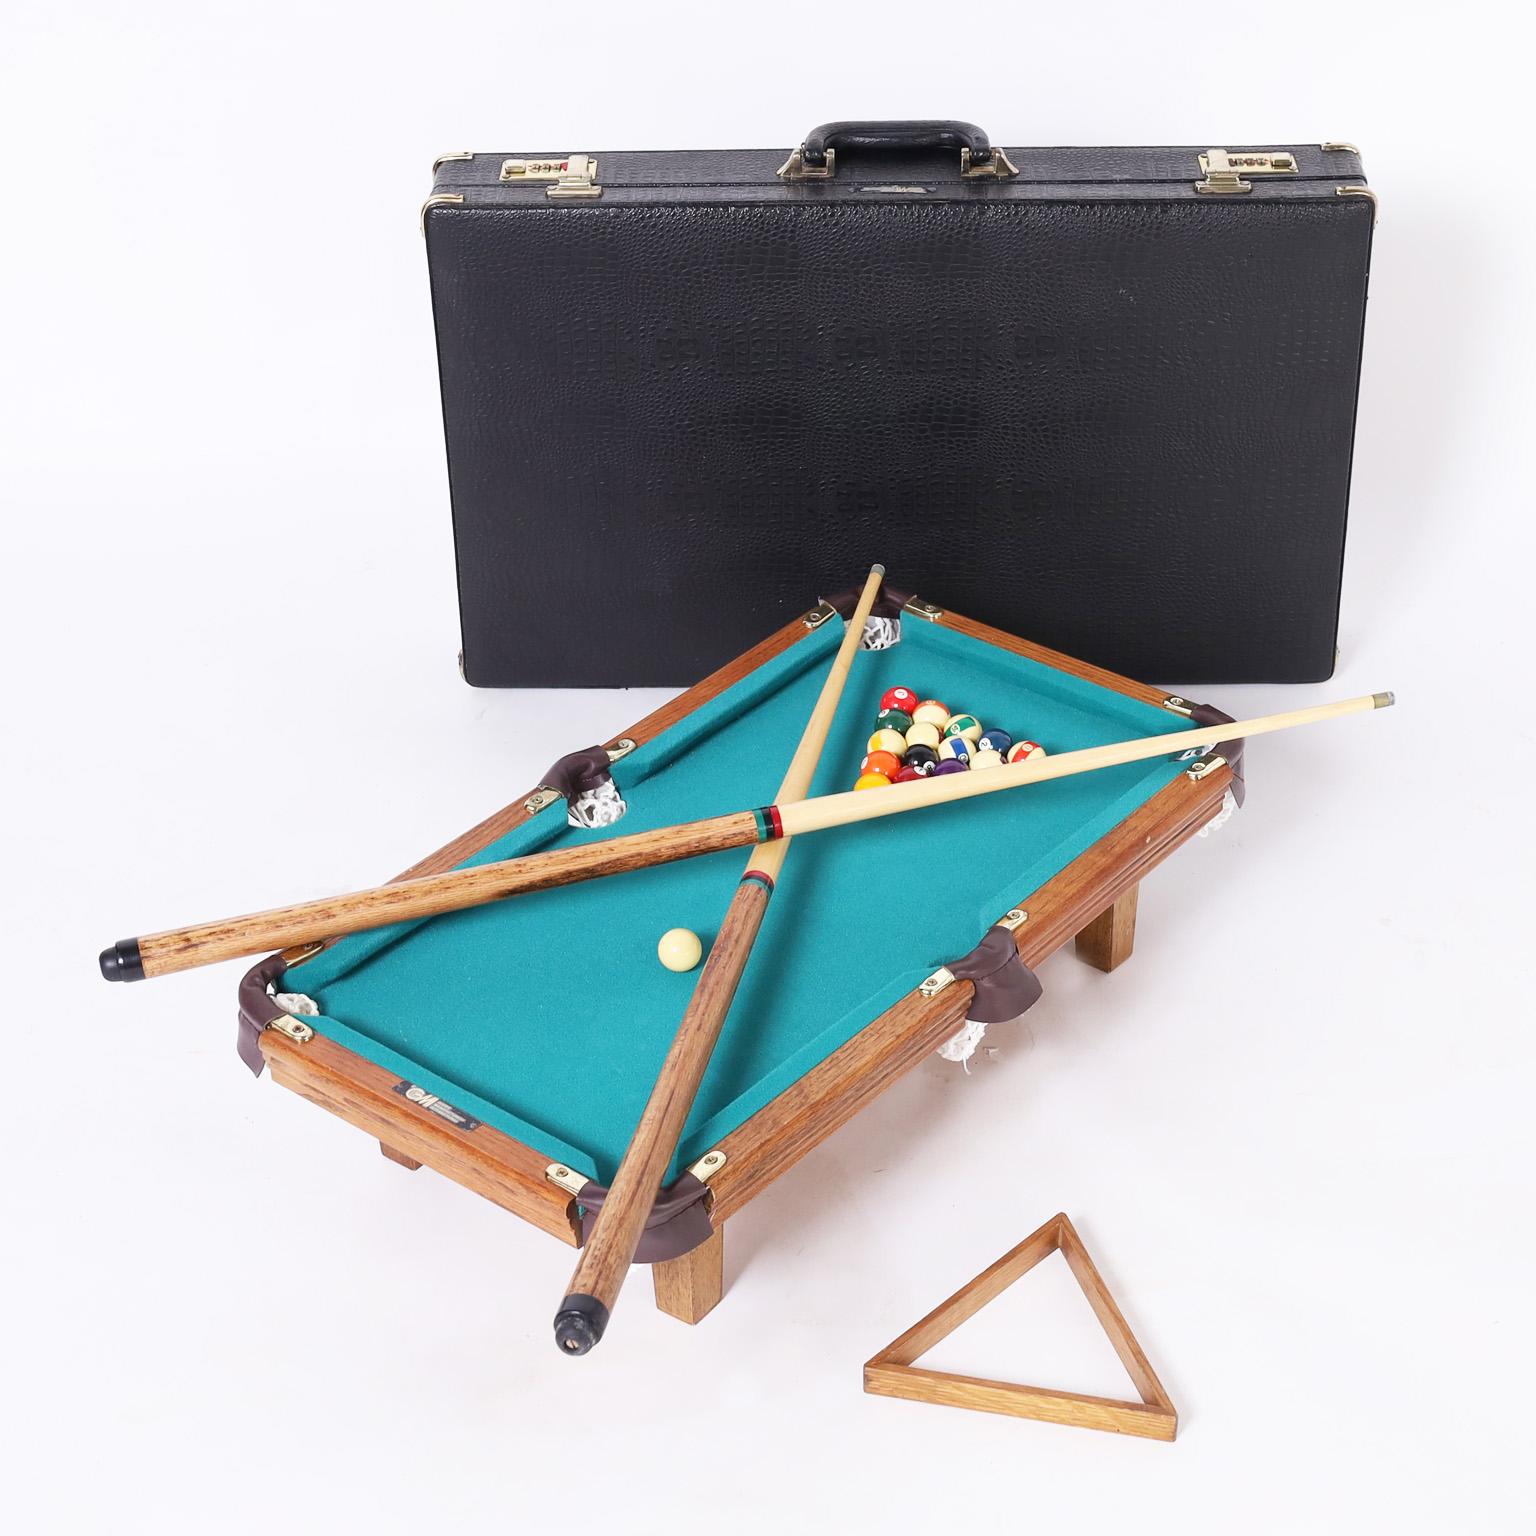 Vintage miniature pool table complete with cue ball, two cue sticks, fifteen numbered balls, lint brush, rack and faux lizard carrying case.